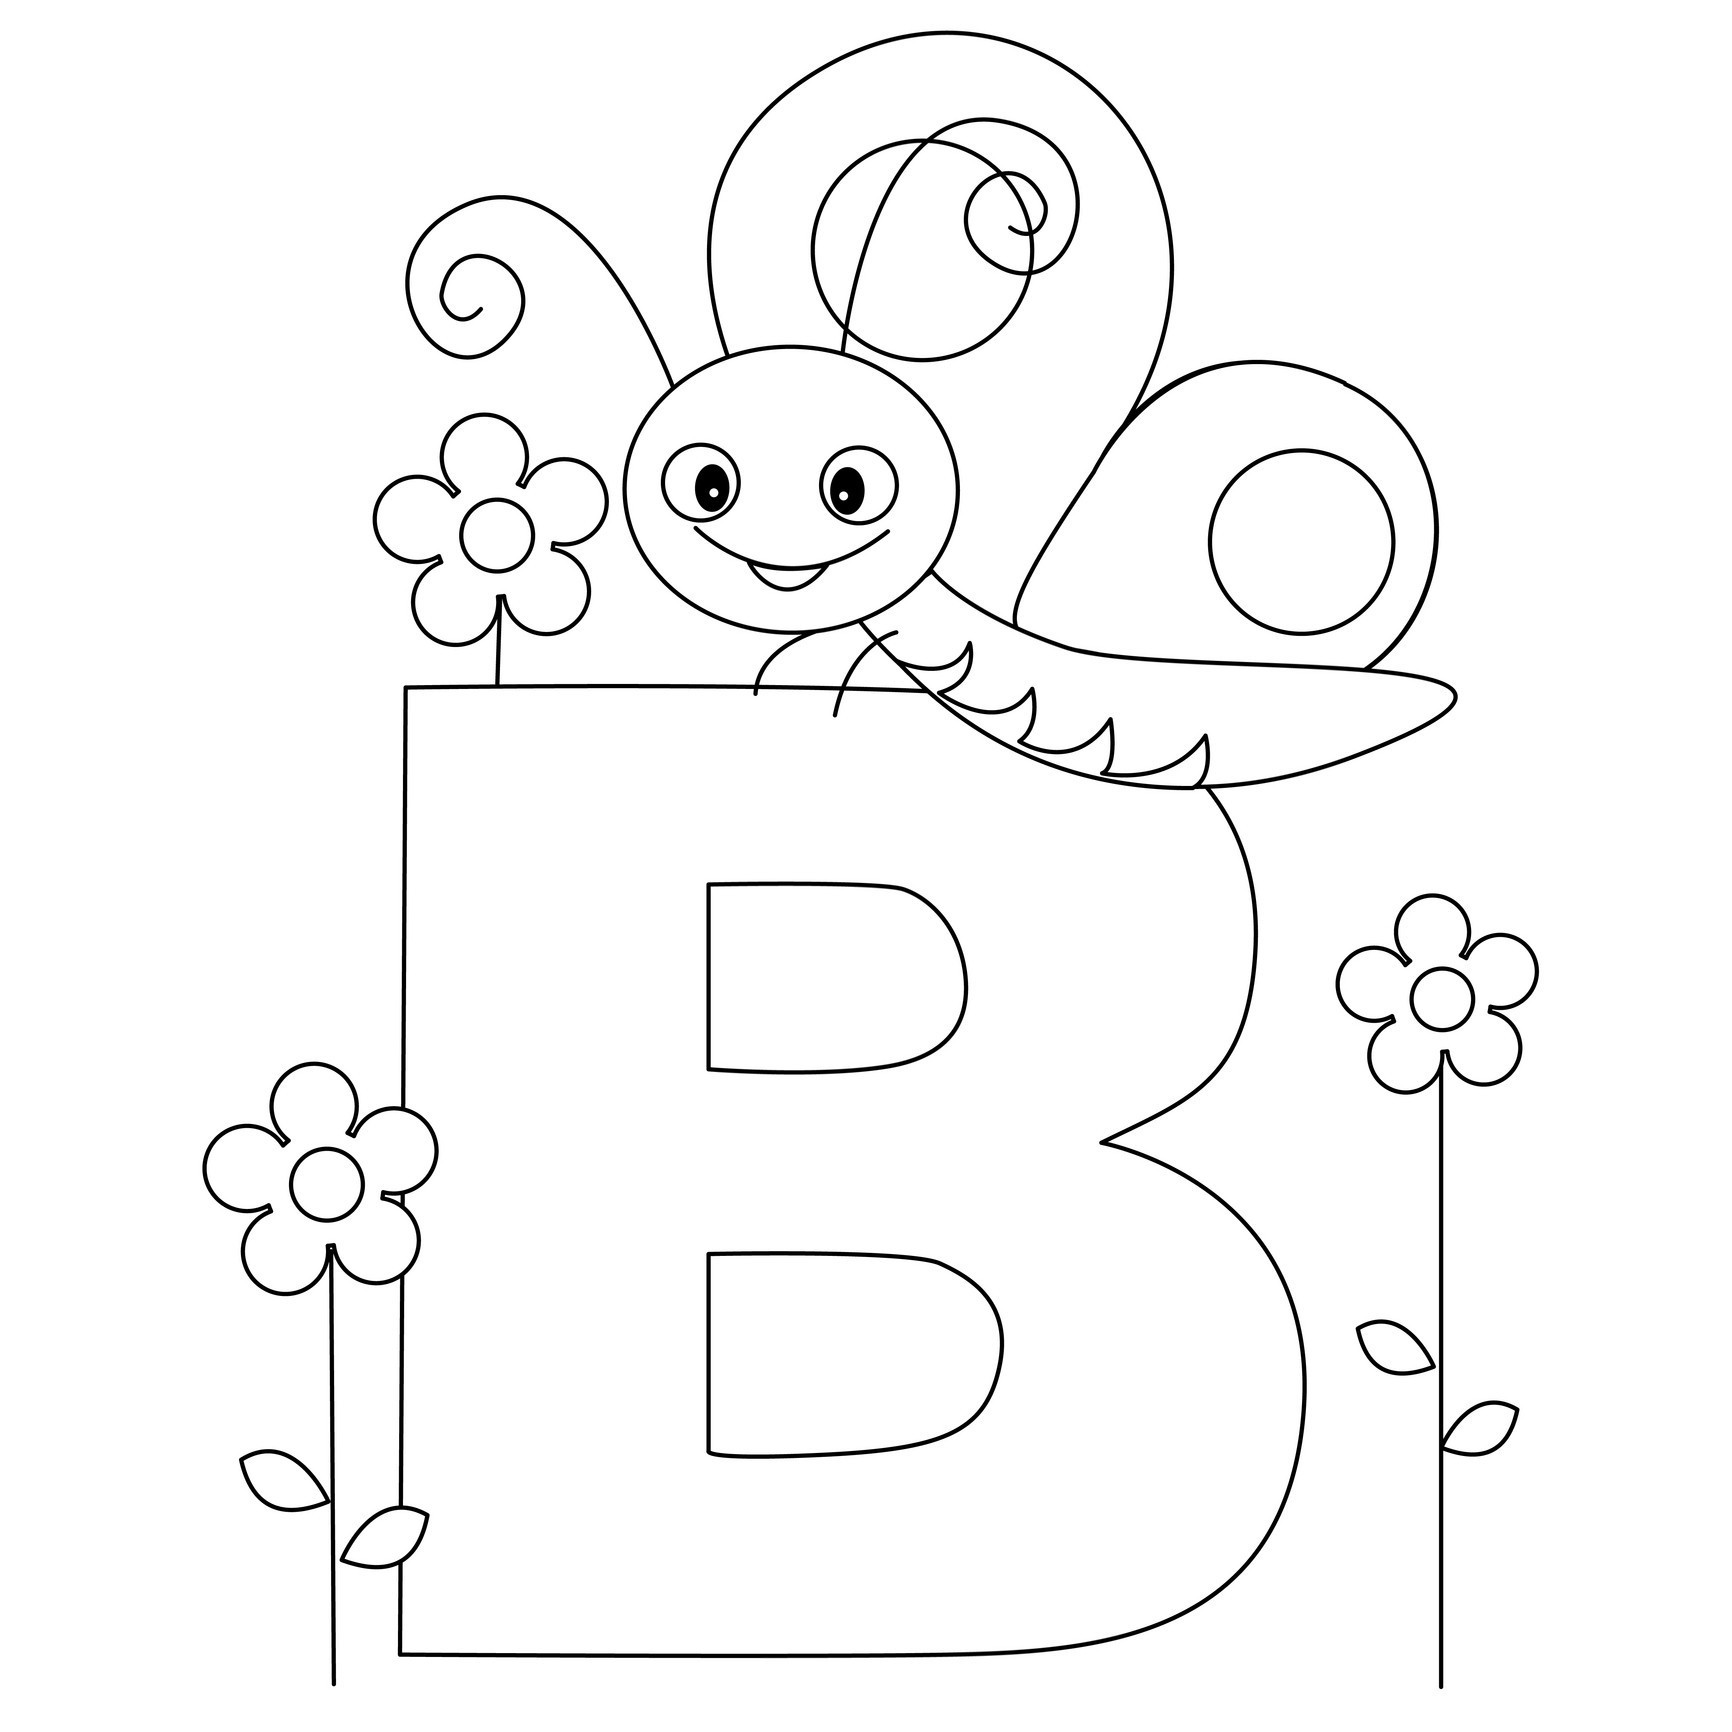 Abc Coloring Pages For Toddlers
 Free Printable Alphabet Coloring Pages for Kids Best